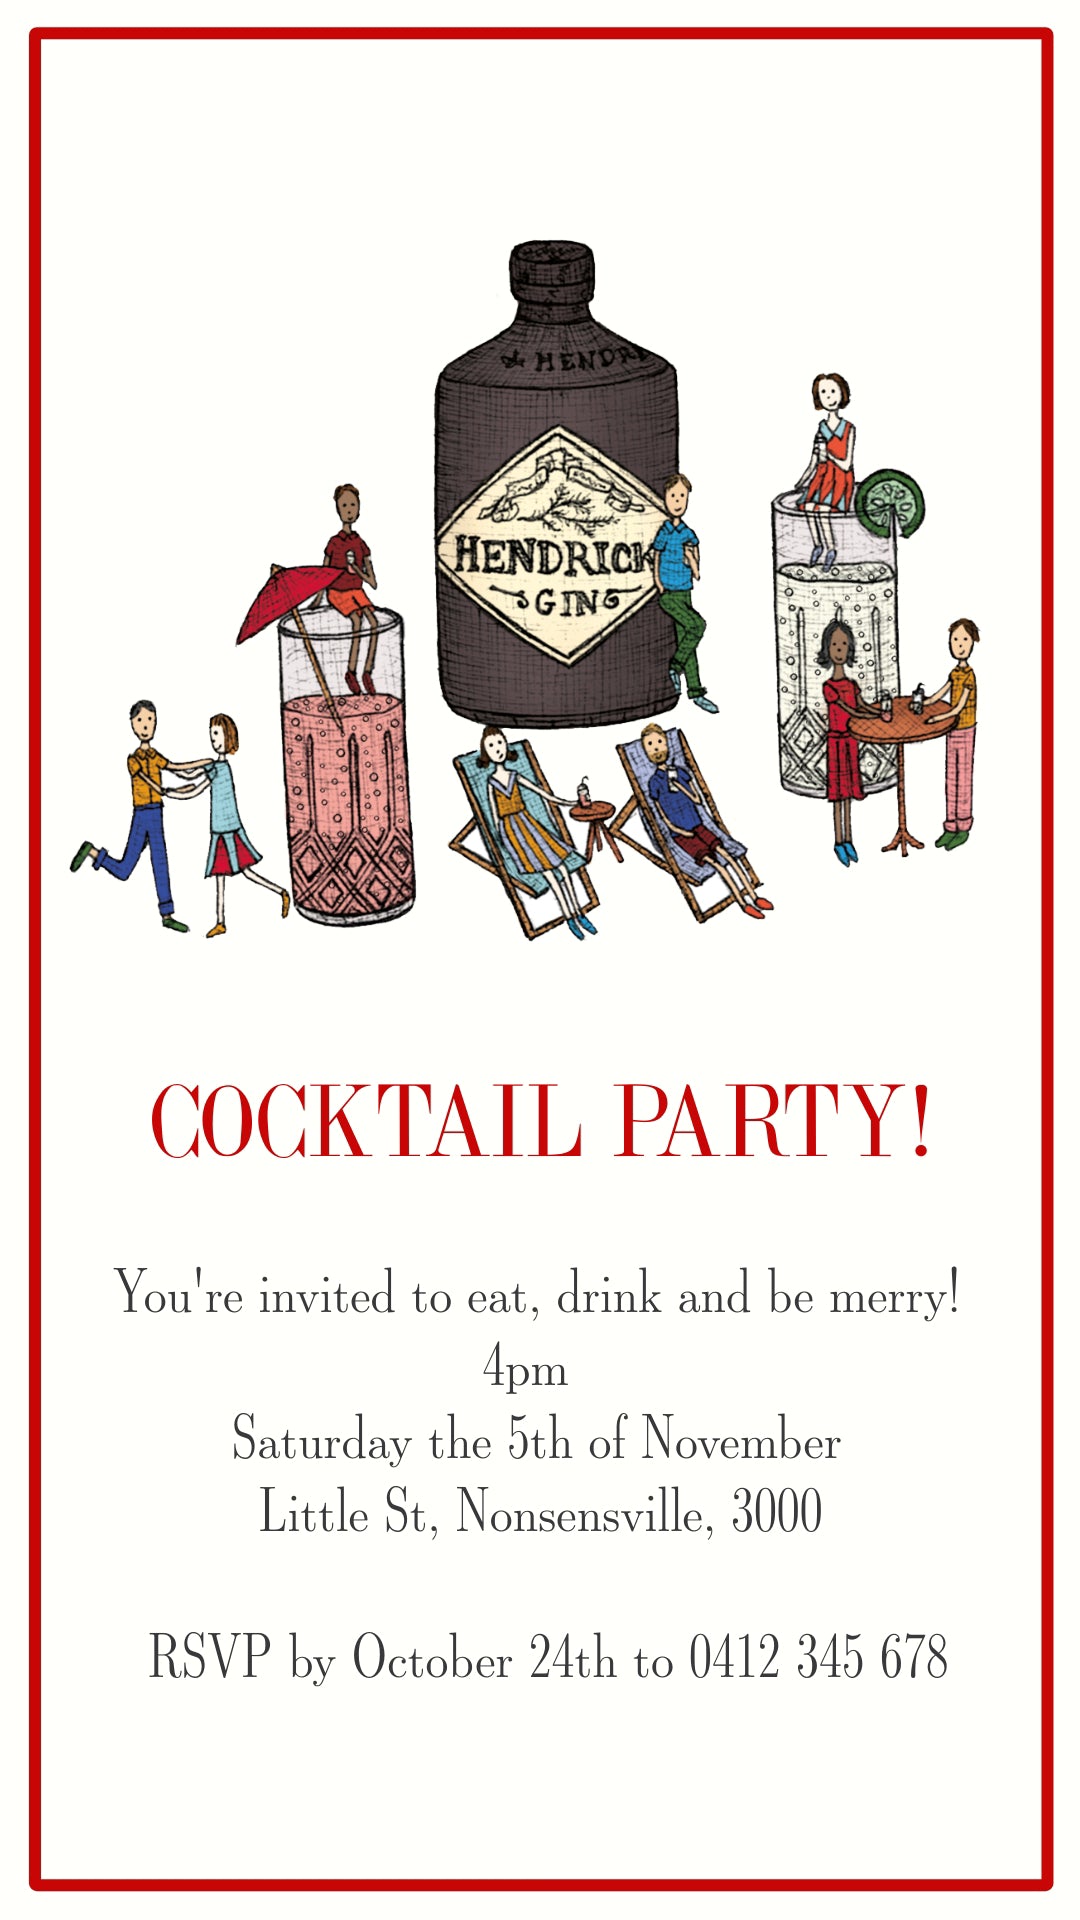 Gin Cocktail Party - Digital Invitation